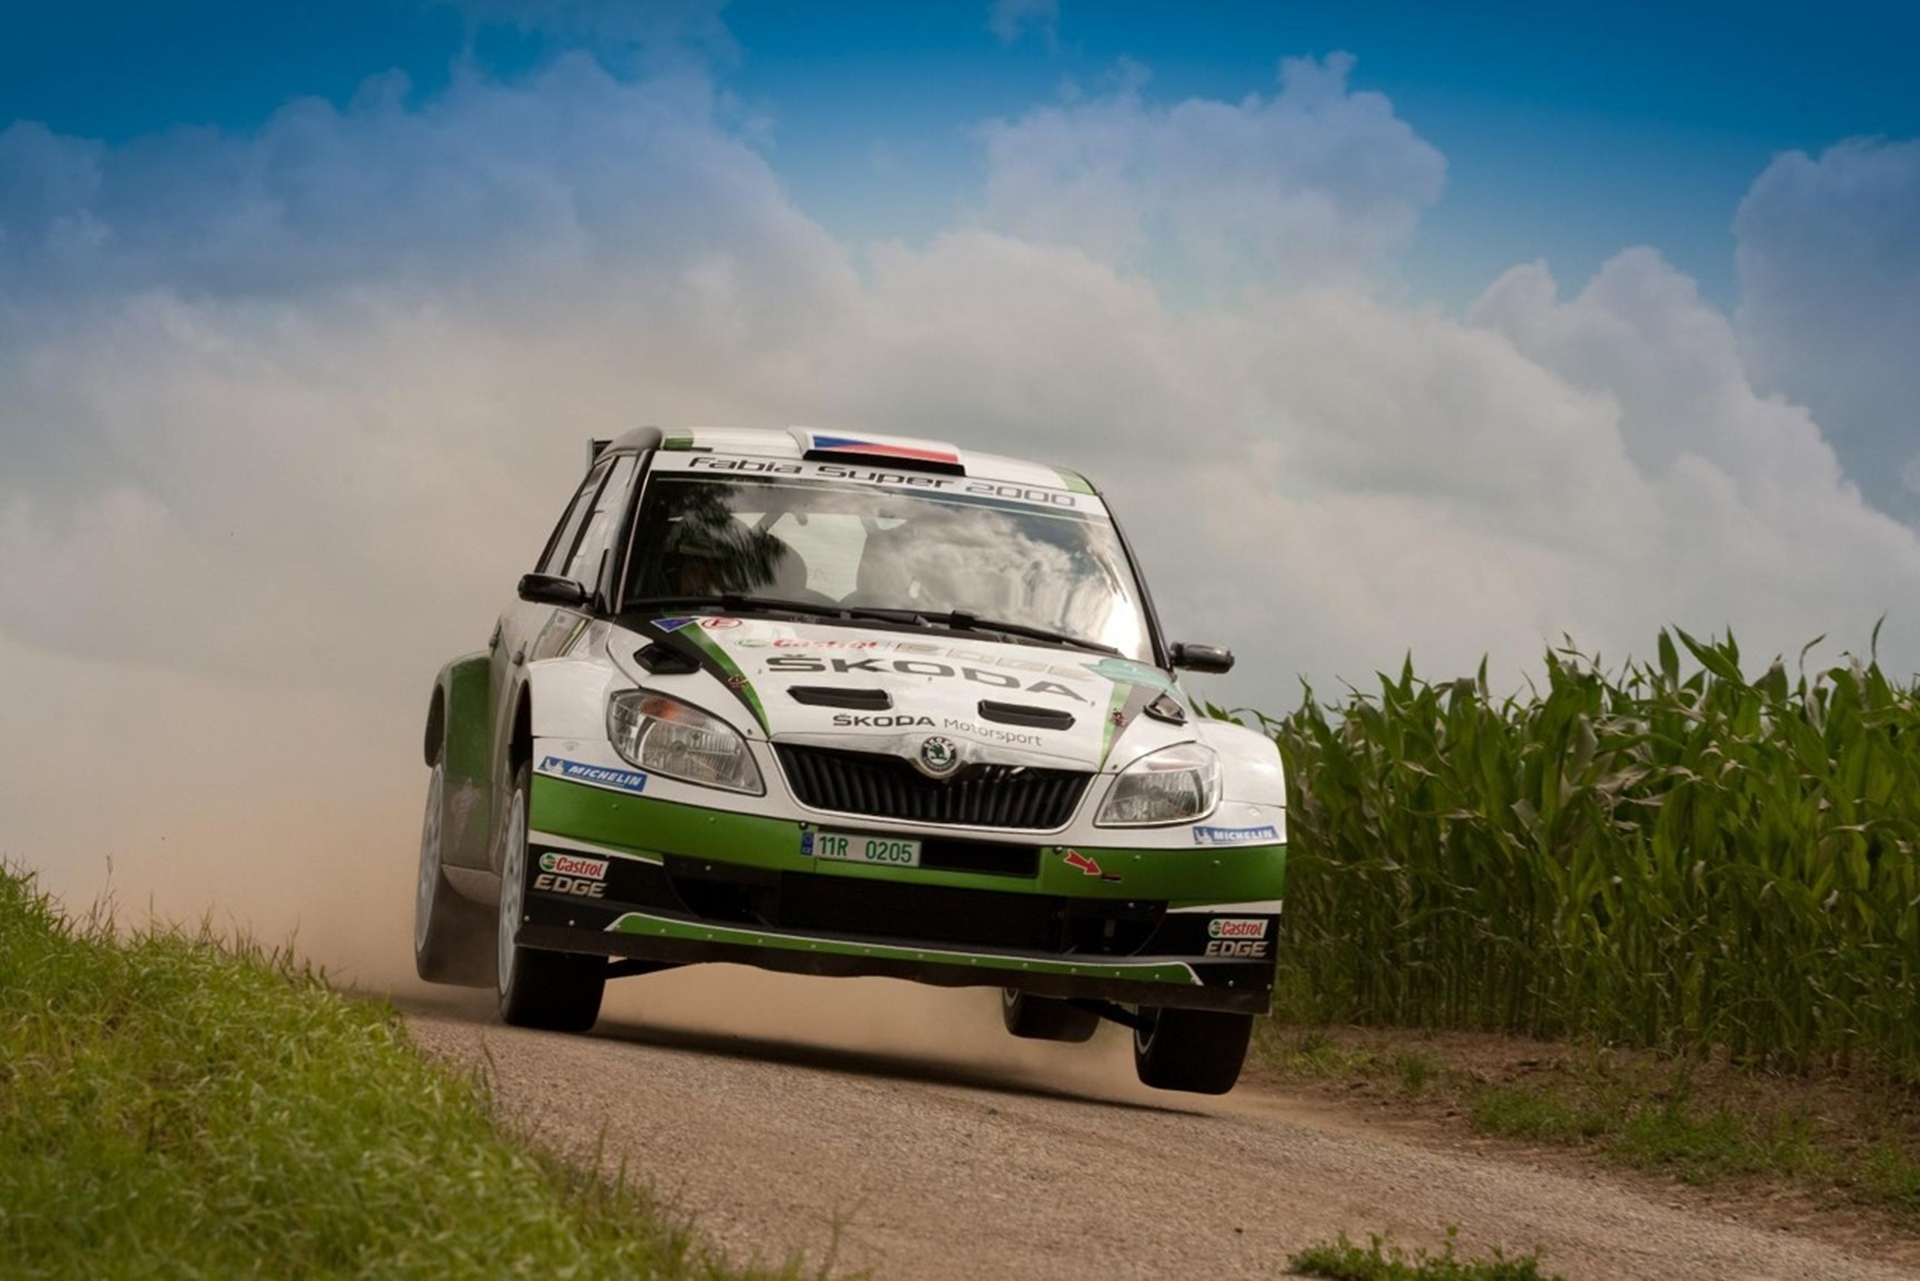 BOHEMIA RALLY TO SEE COMPLETE ŠKODA MOTORSPORT TEAM IN ACTION